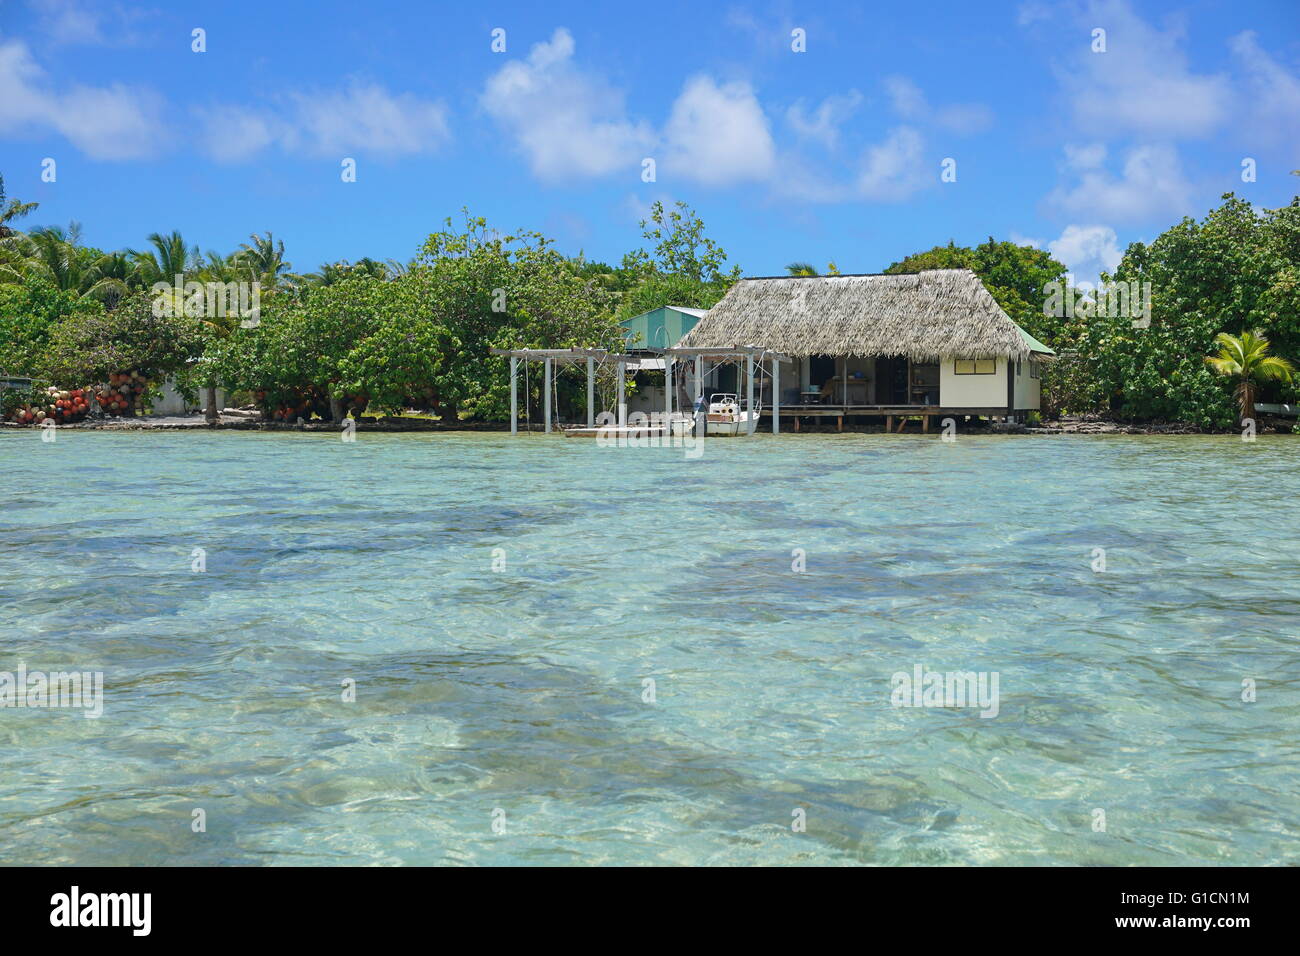 Shallow water of the lagoon with typical home on the shore of an islet, Huahine island, Pacific ocean, French Polynesia Stock Photo